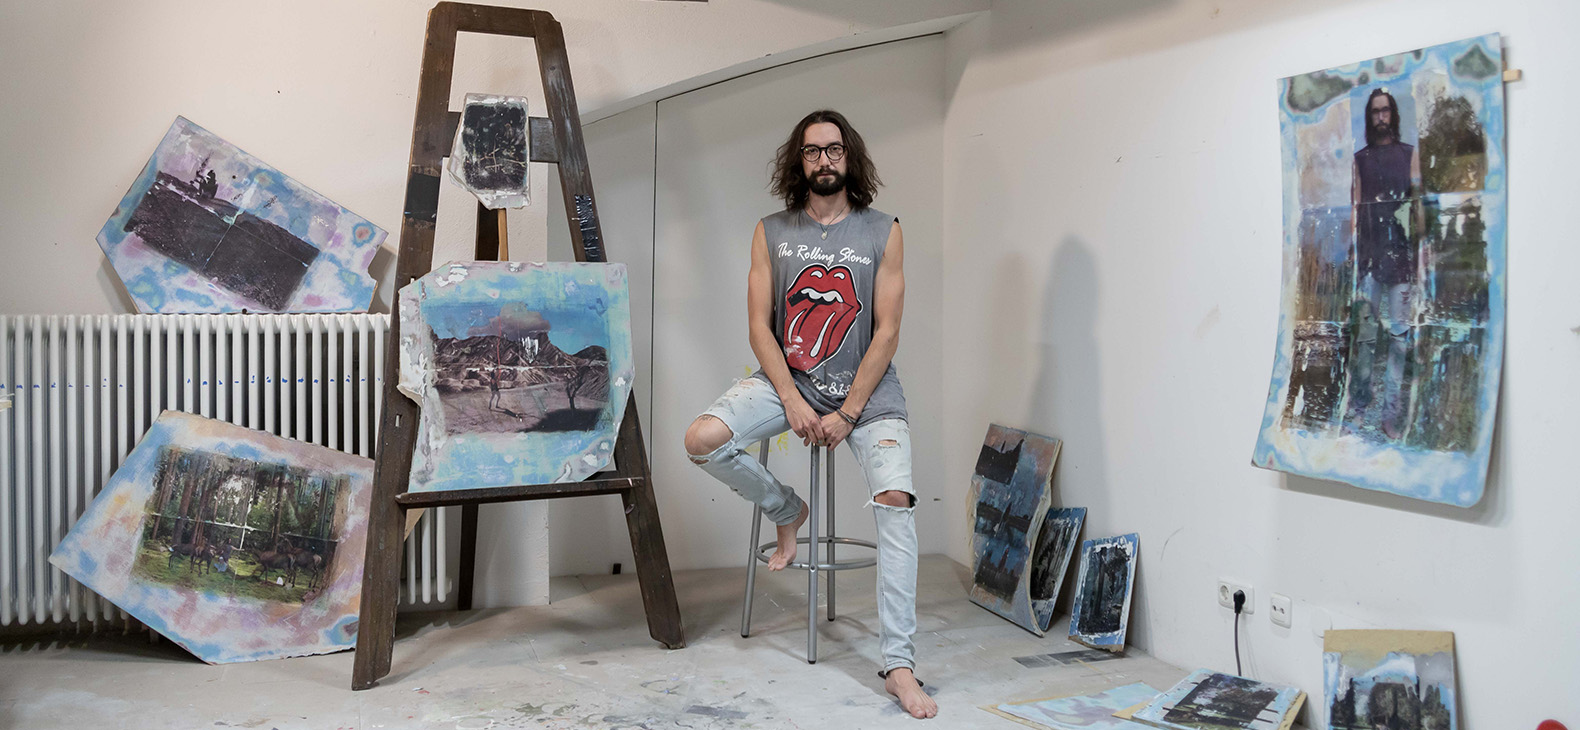 The artist Petr Kubac sits on a stool. His paintings, which he worked on during his stay at the Schafhof, can be seen in the room and on the walls.